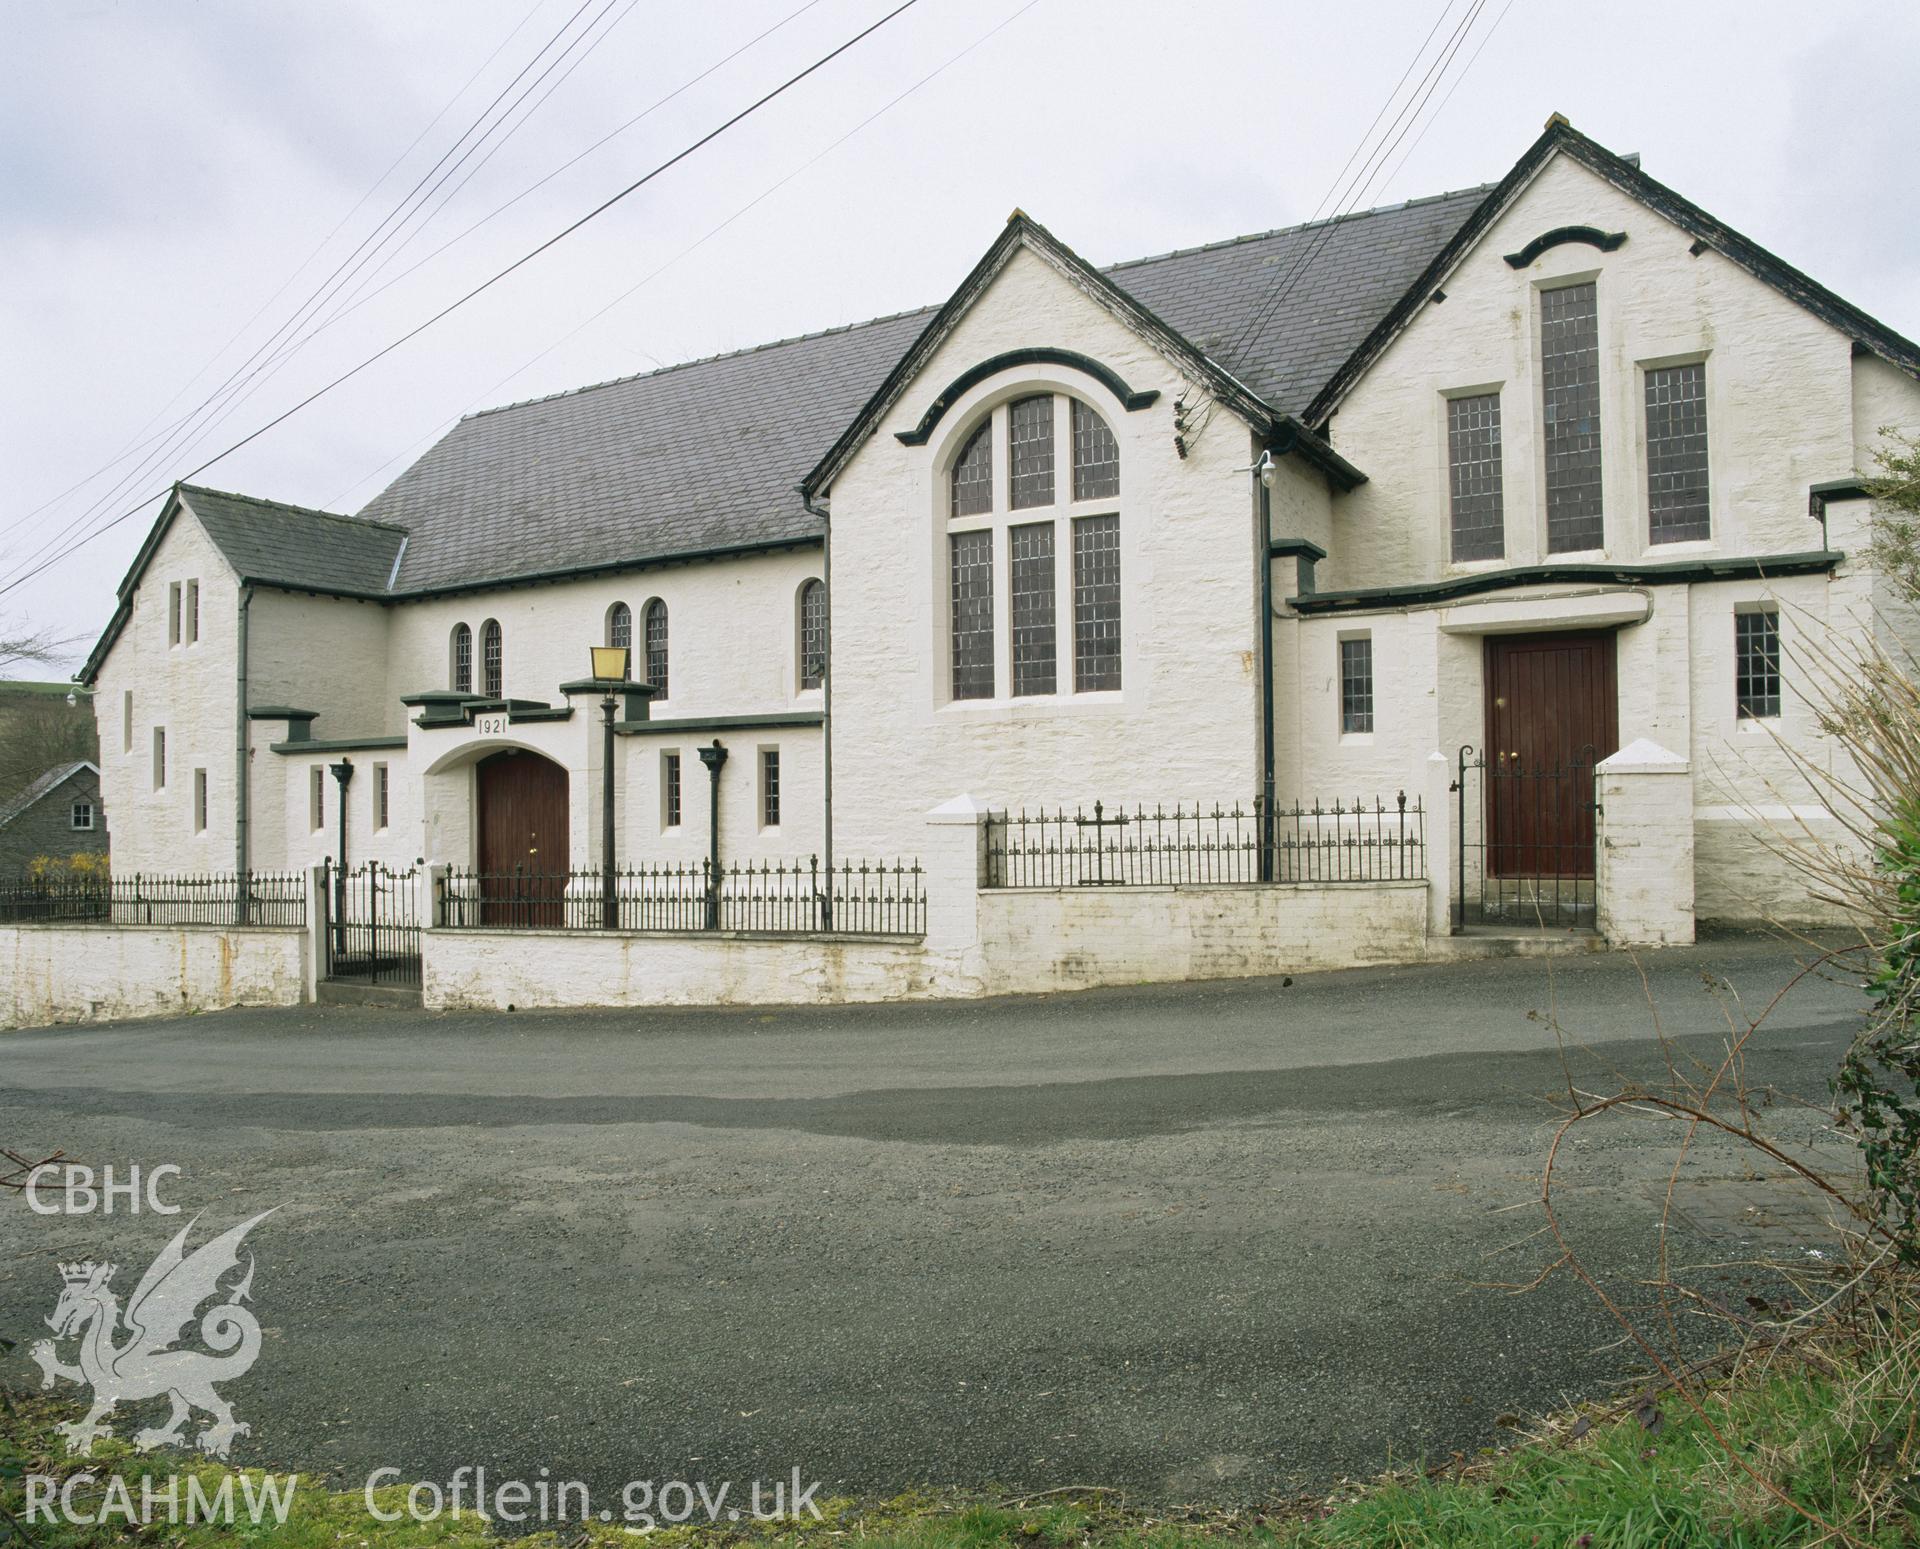 Colour transparency showing Capel y Drewen, Cwmcou, produced by Iain Wright, June 2004